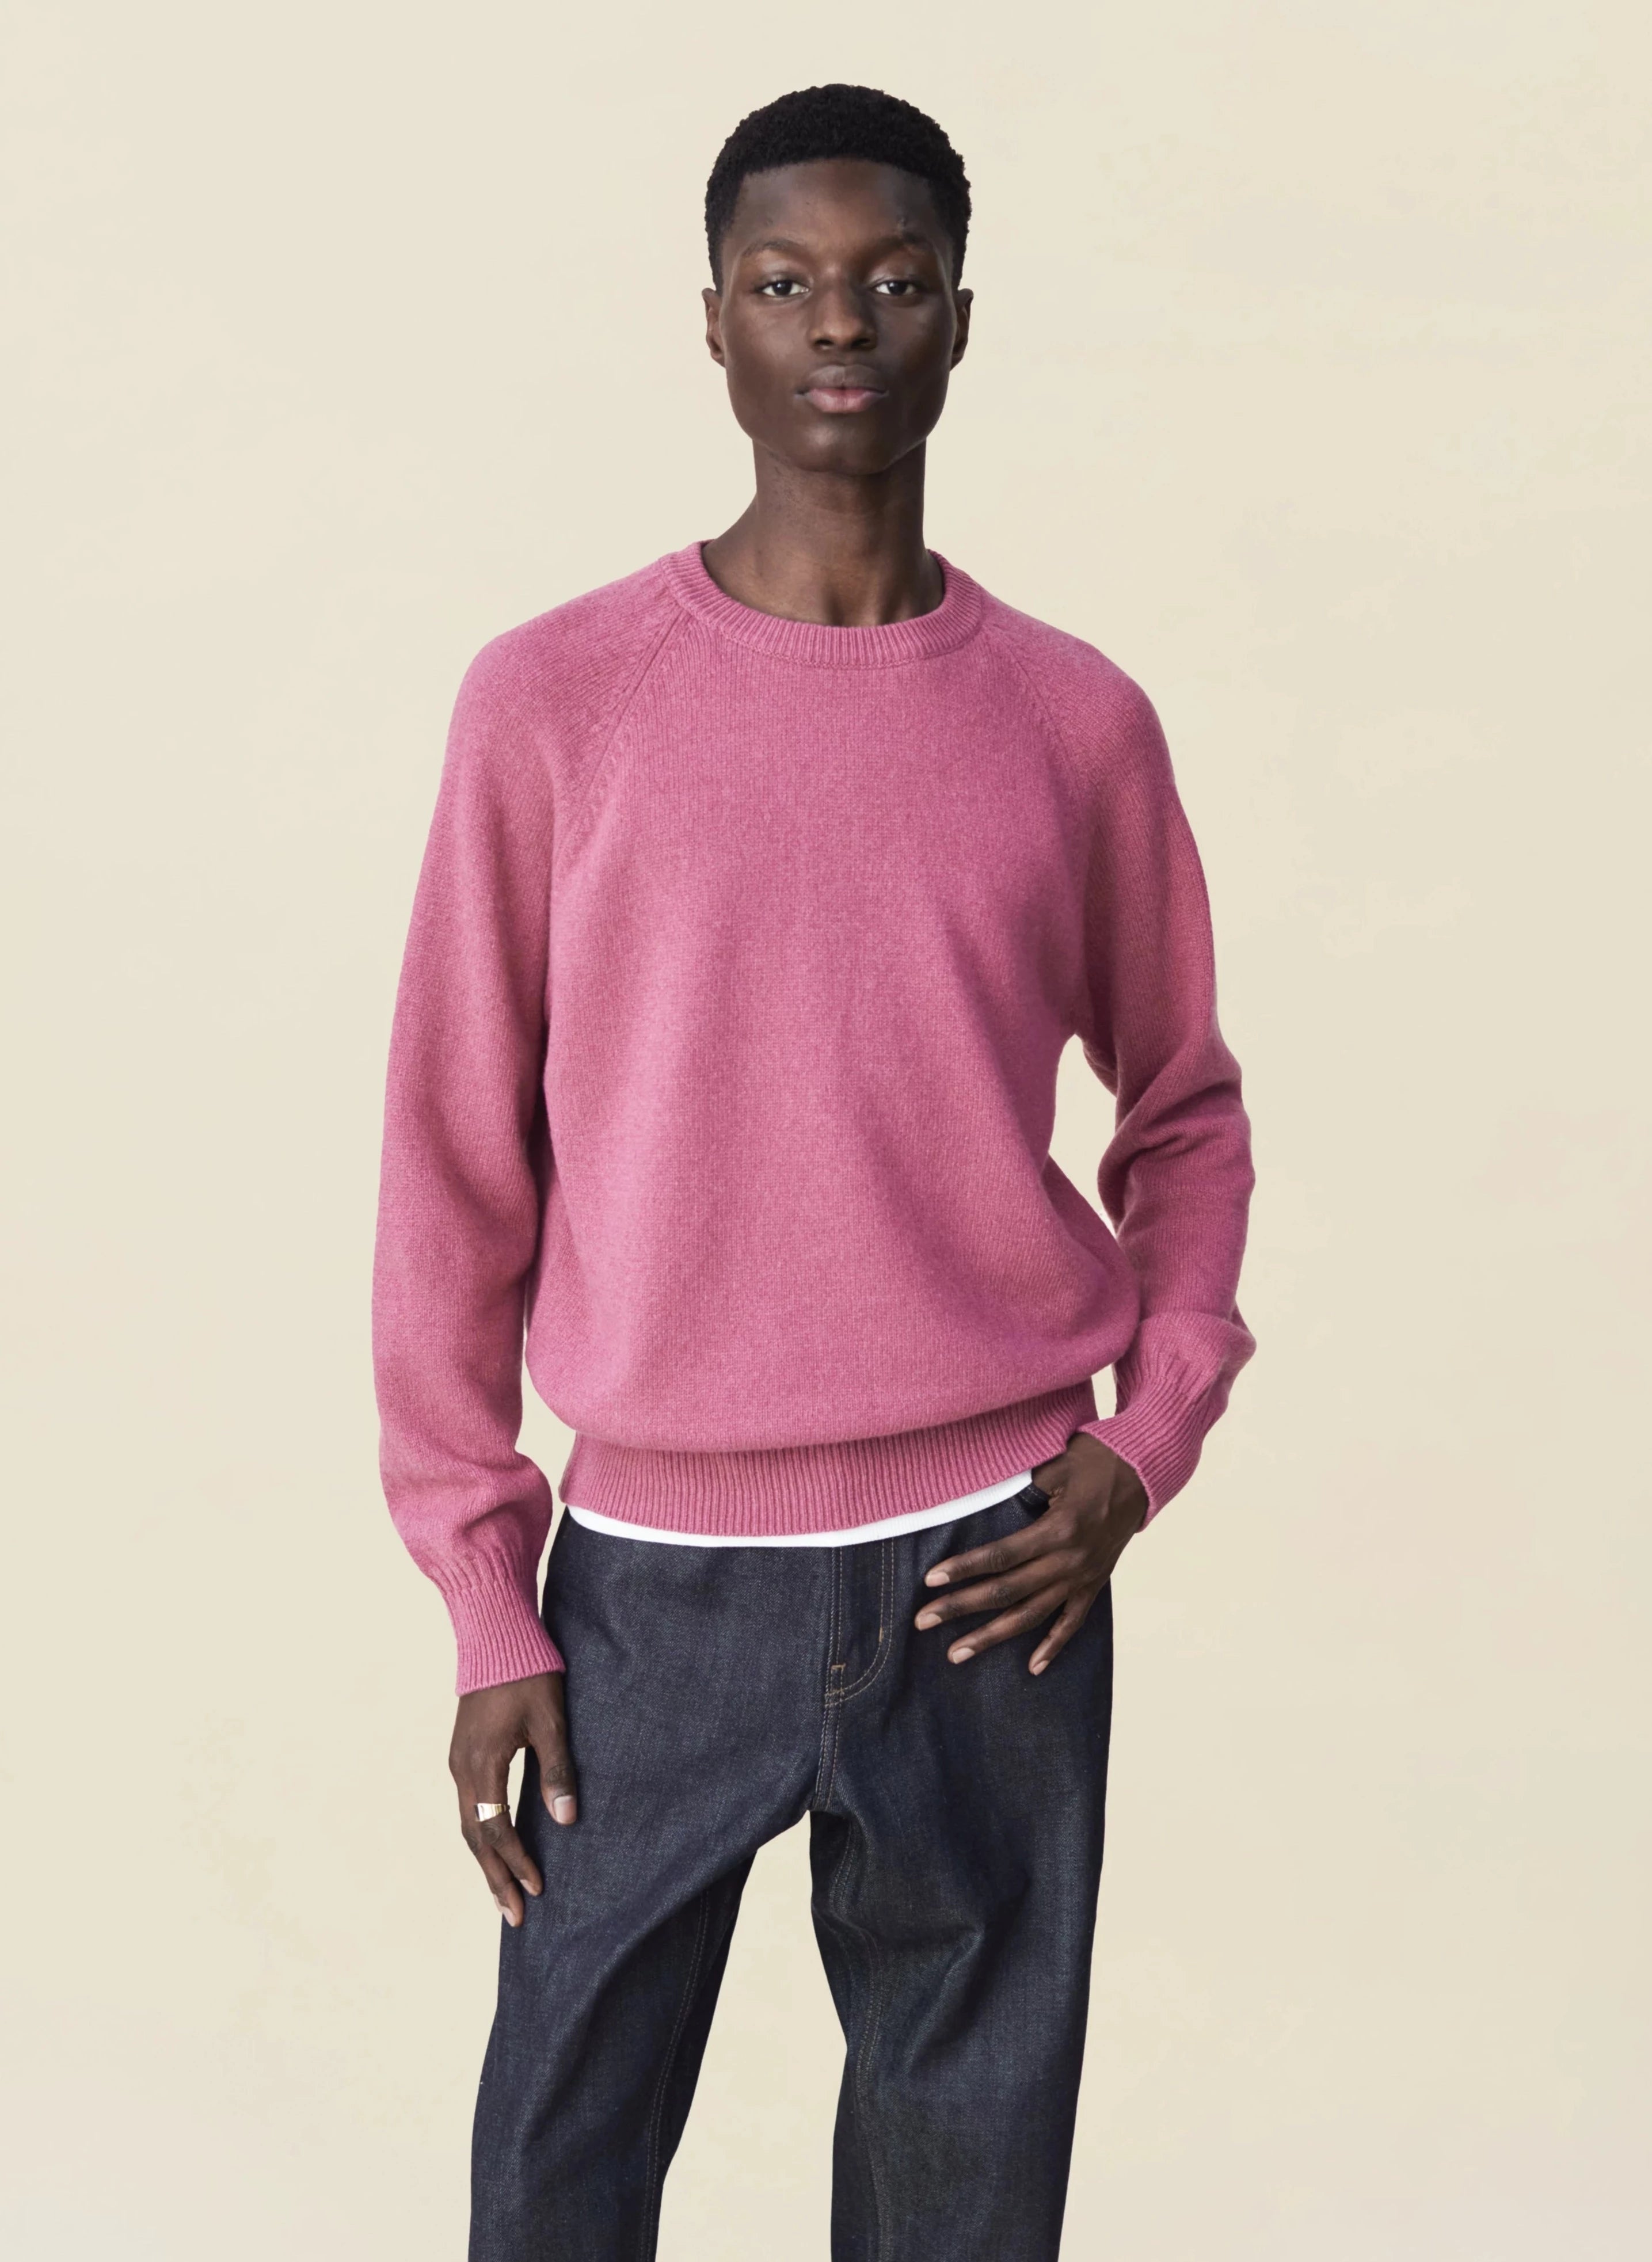 Sweater Crewneck in Indian Pink Cashmere